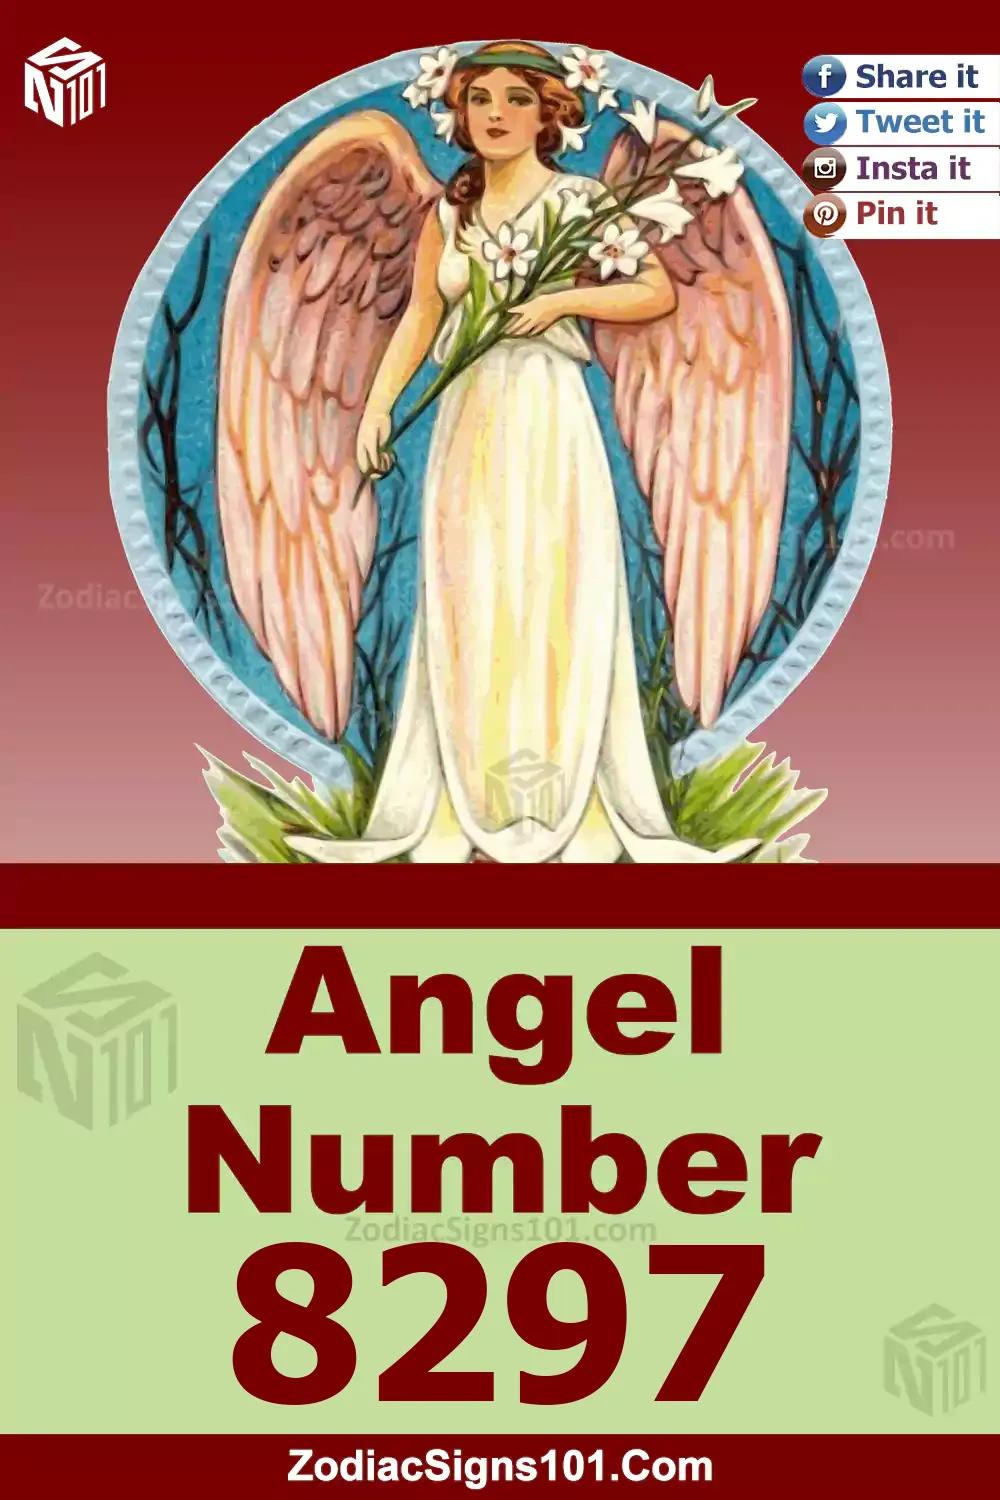 8297 Angel Number Meaning